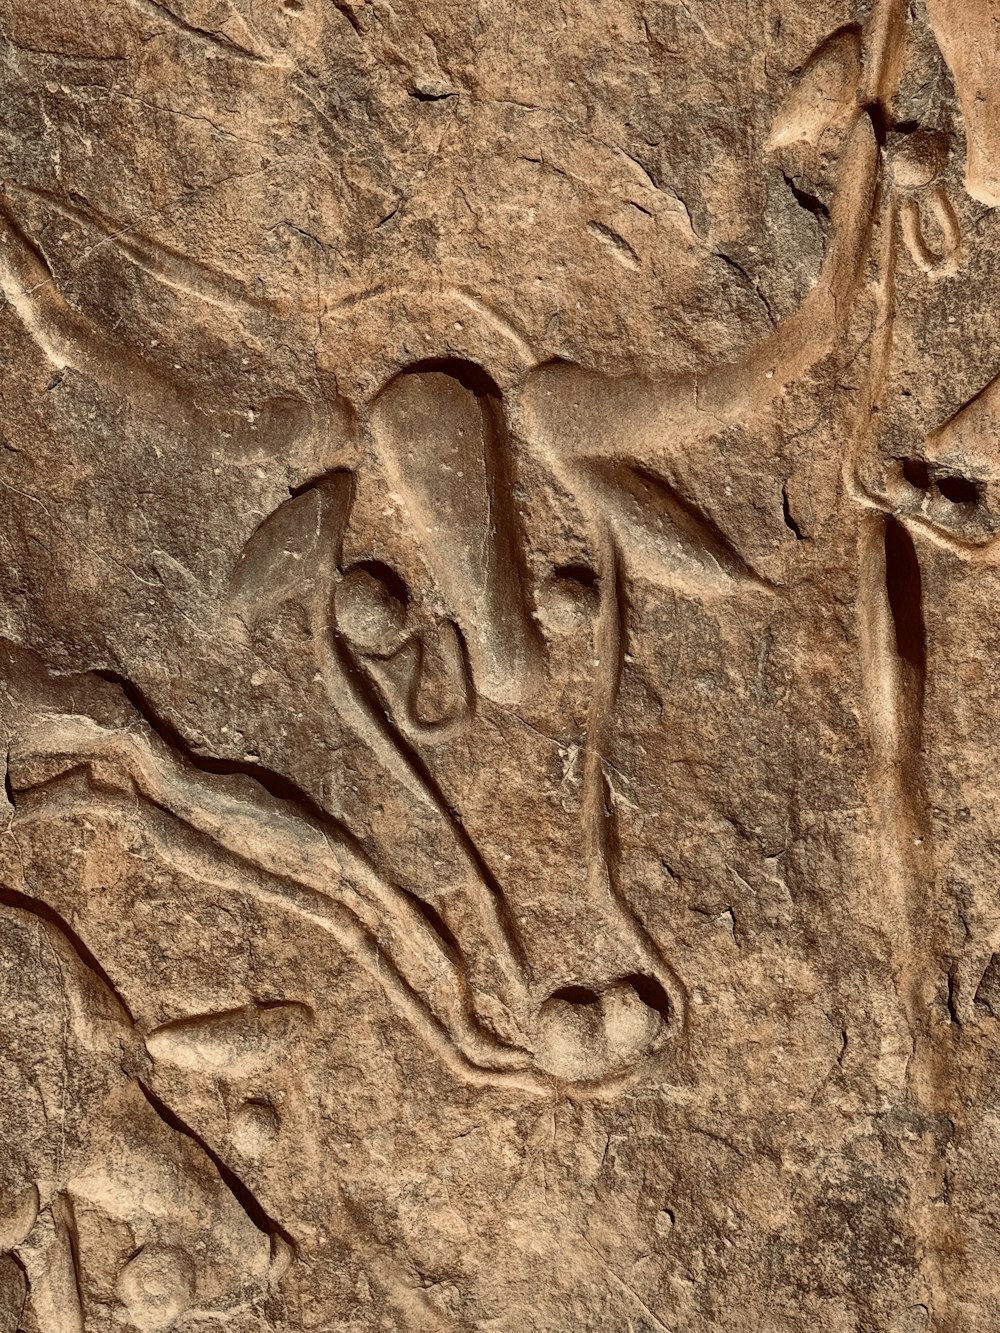 an animal carving on a rock wall